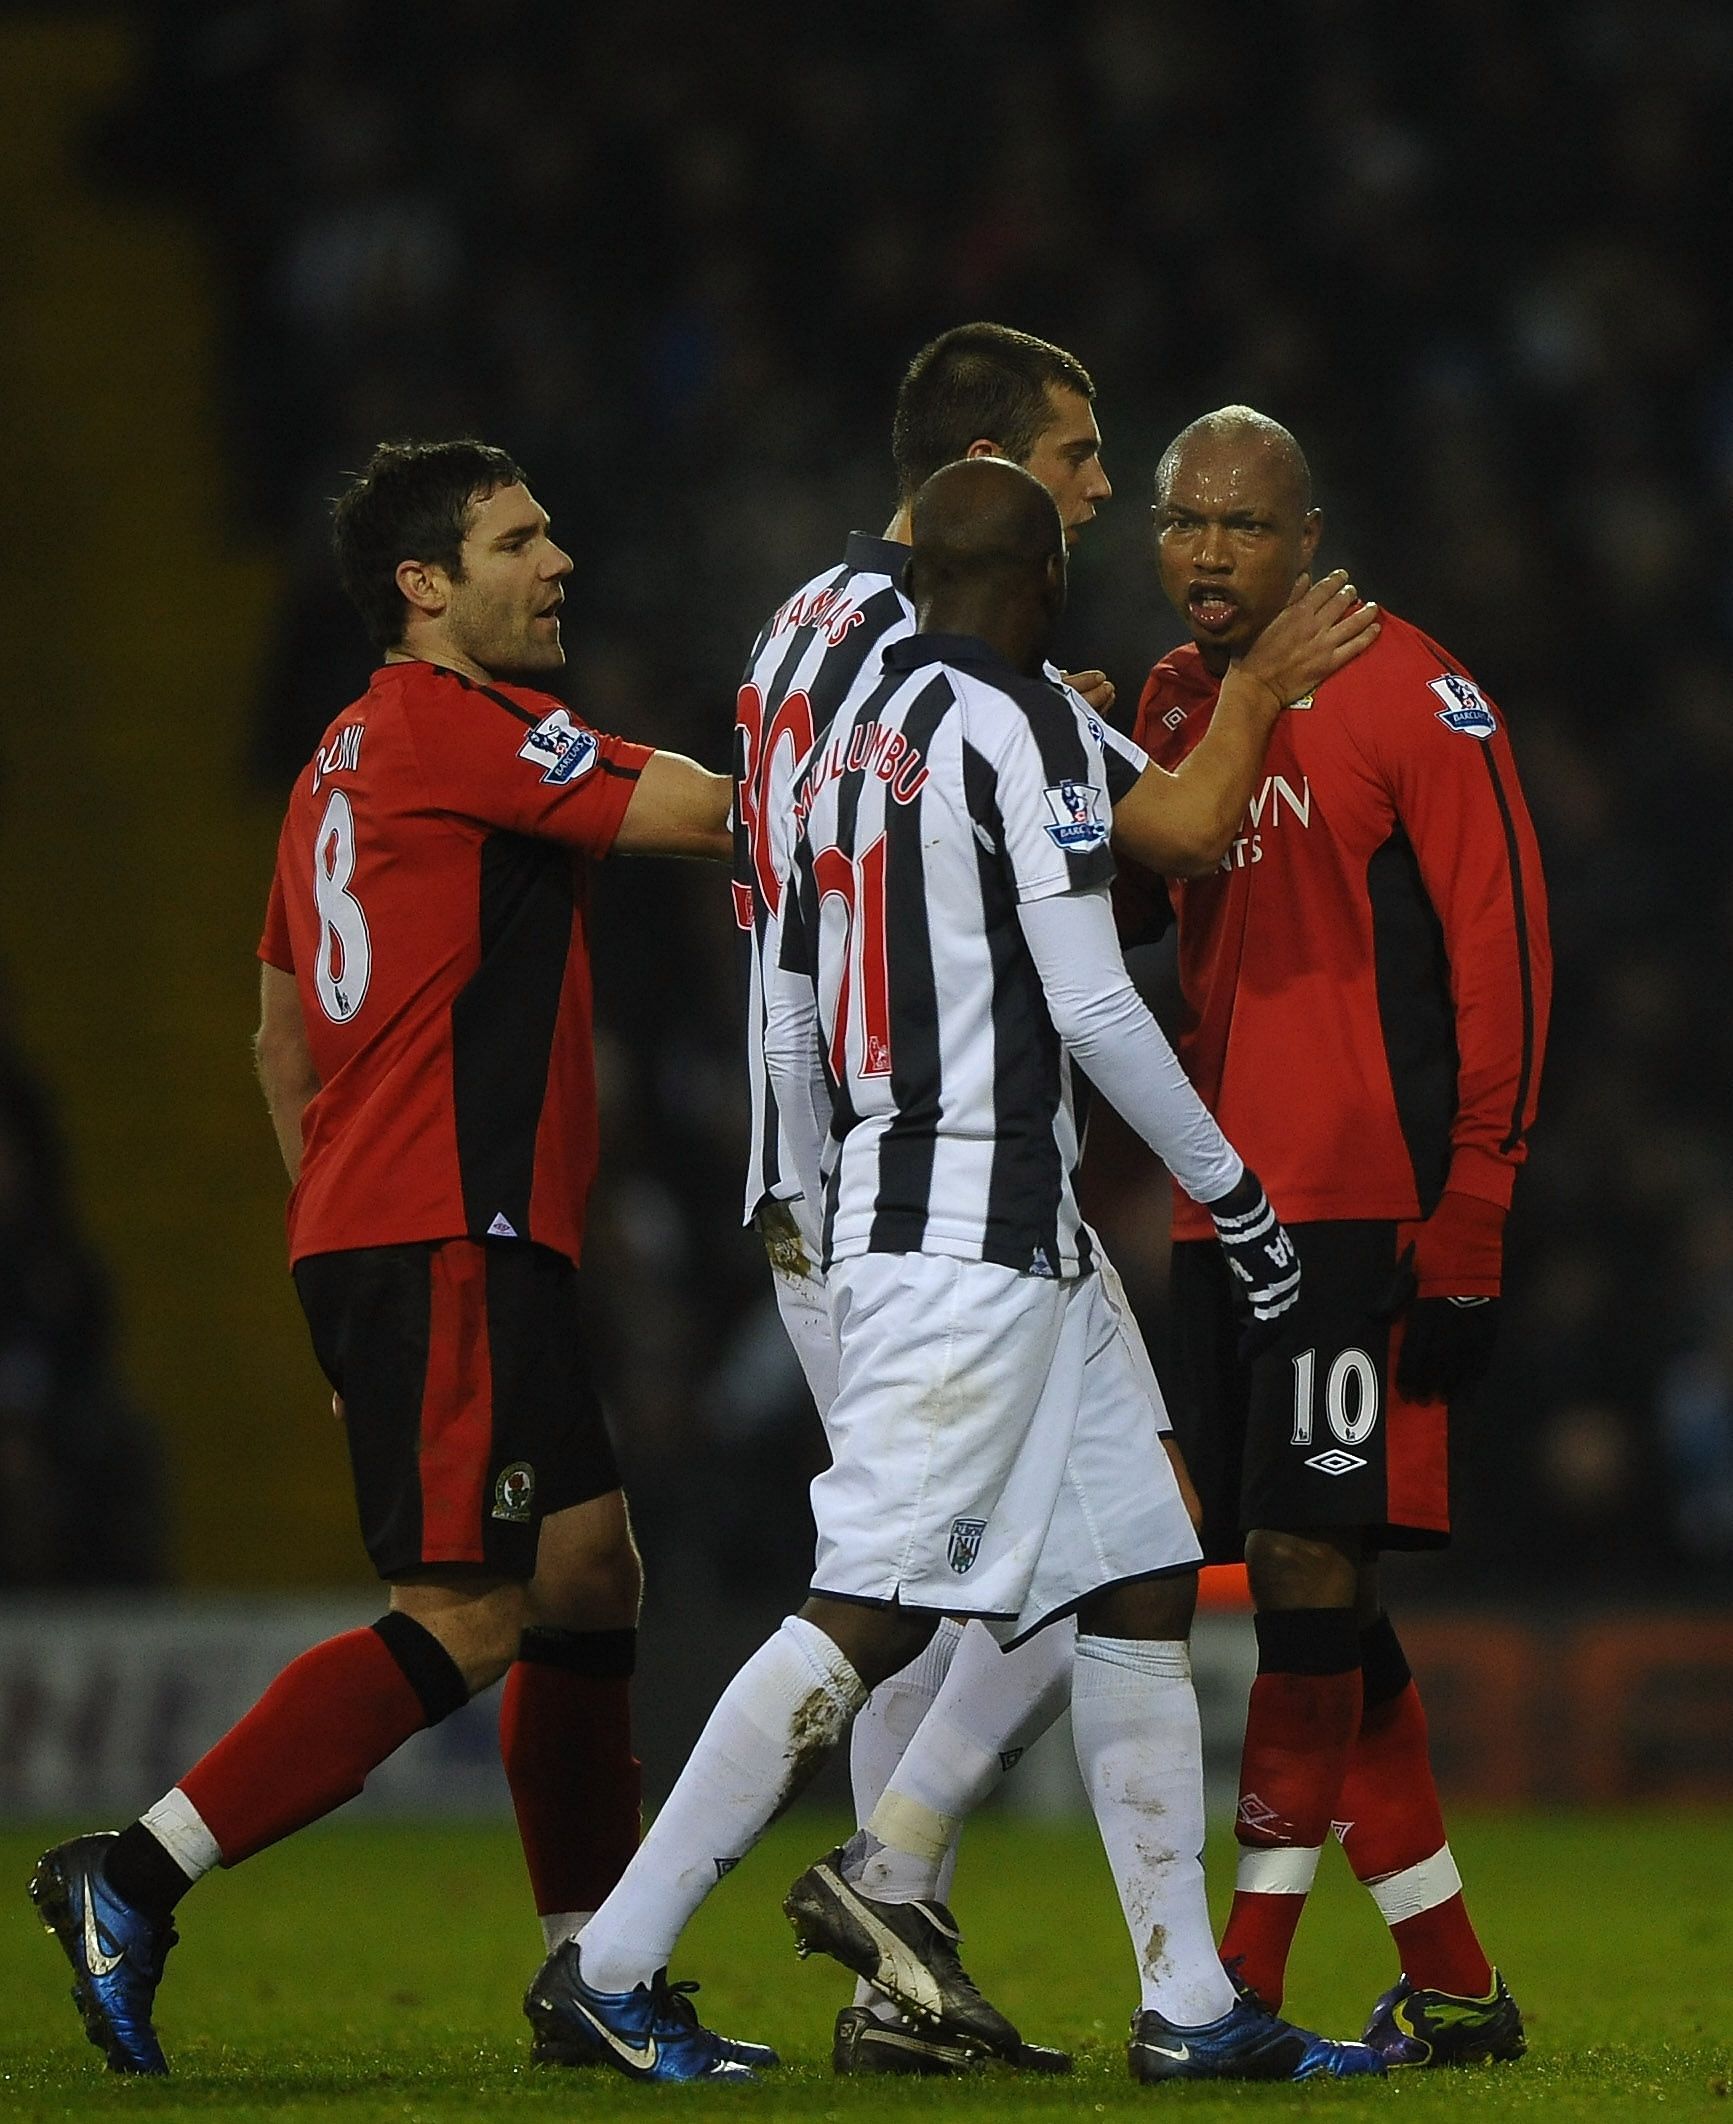 El-Hadji Diouf of Blackburn Rovers argues with Youssouf Mulumbu of West Bromwich Albion during the Barclays Premier League match between West Bromwich Albion and Blackburn Rovers at The Hawthorns on December 28, 2010.